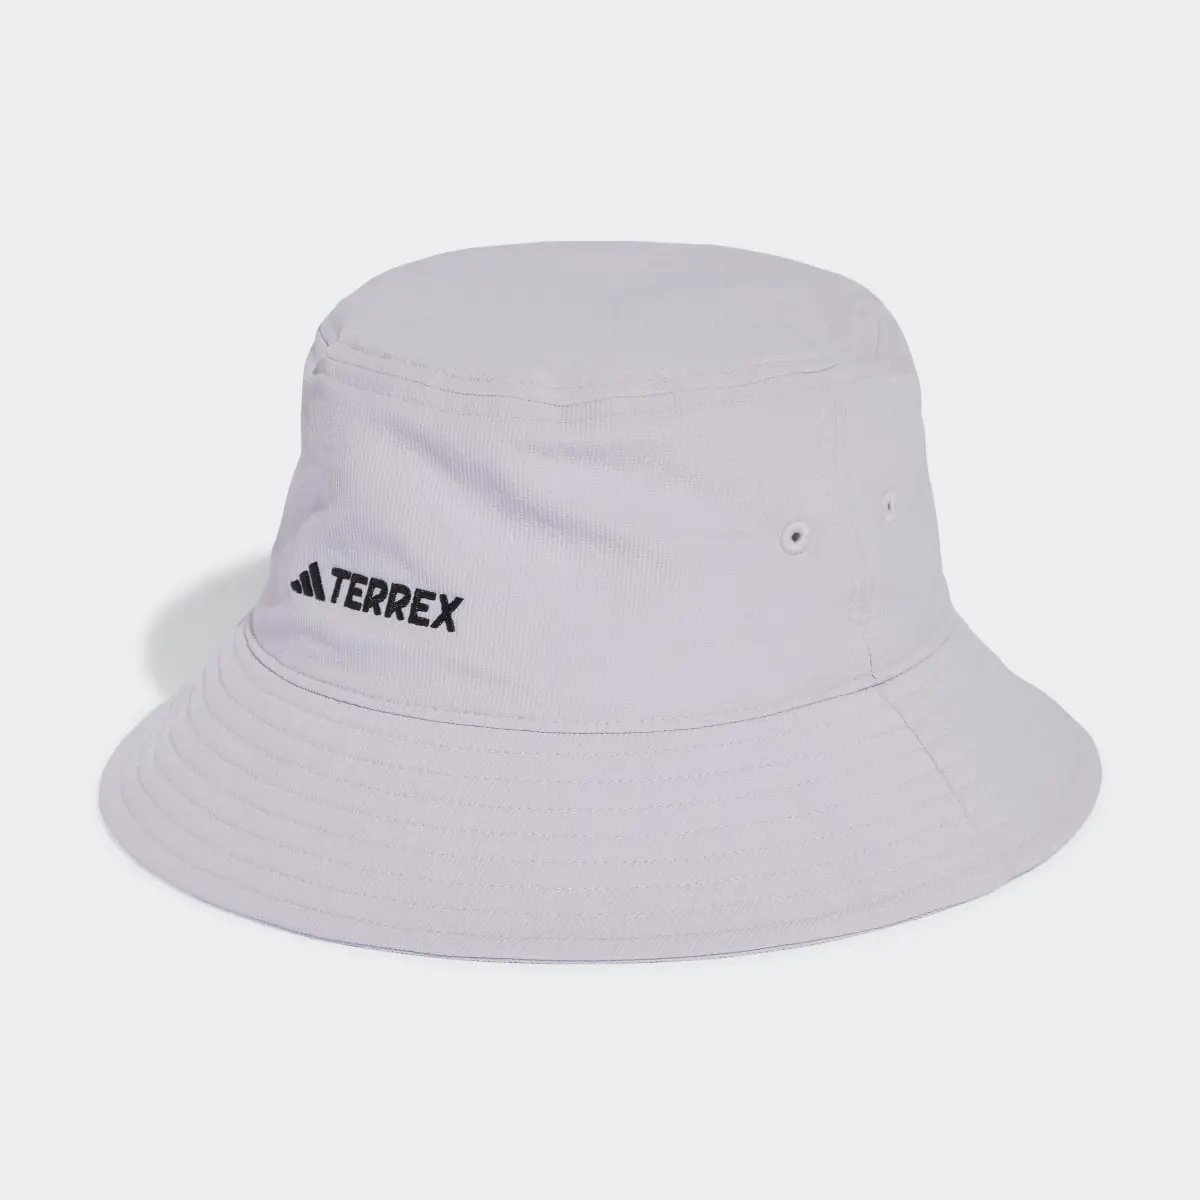 Adidas Terrex HEAT.RDY Made To Be Remade Bucket Hat. 2